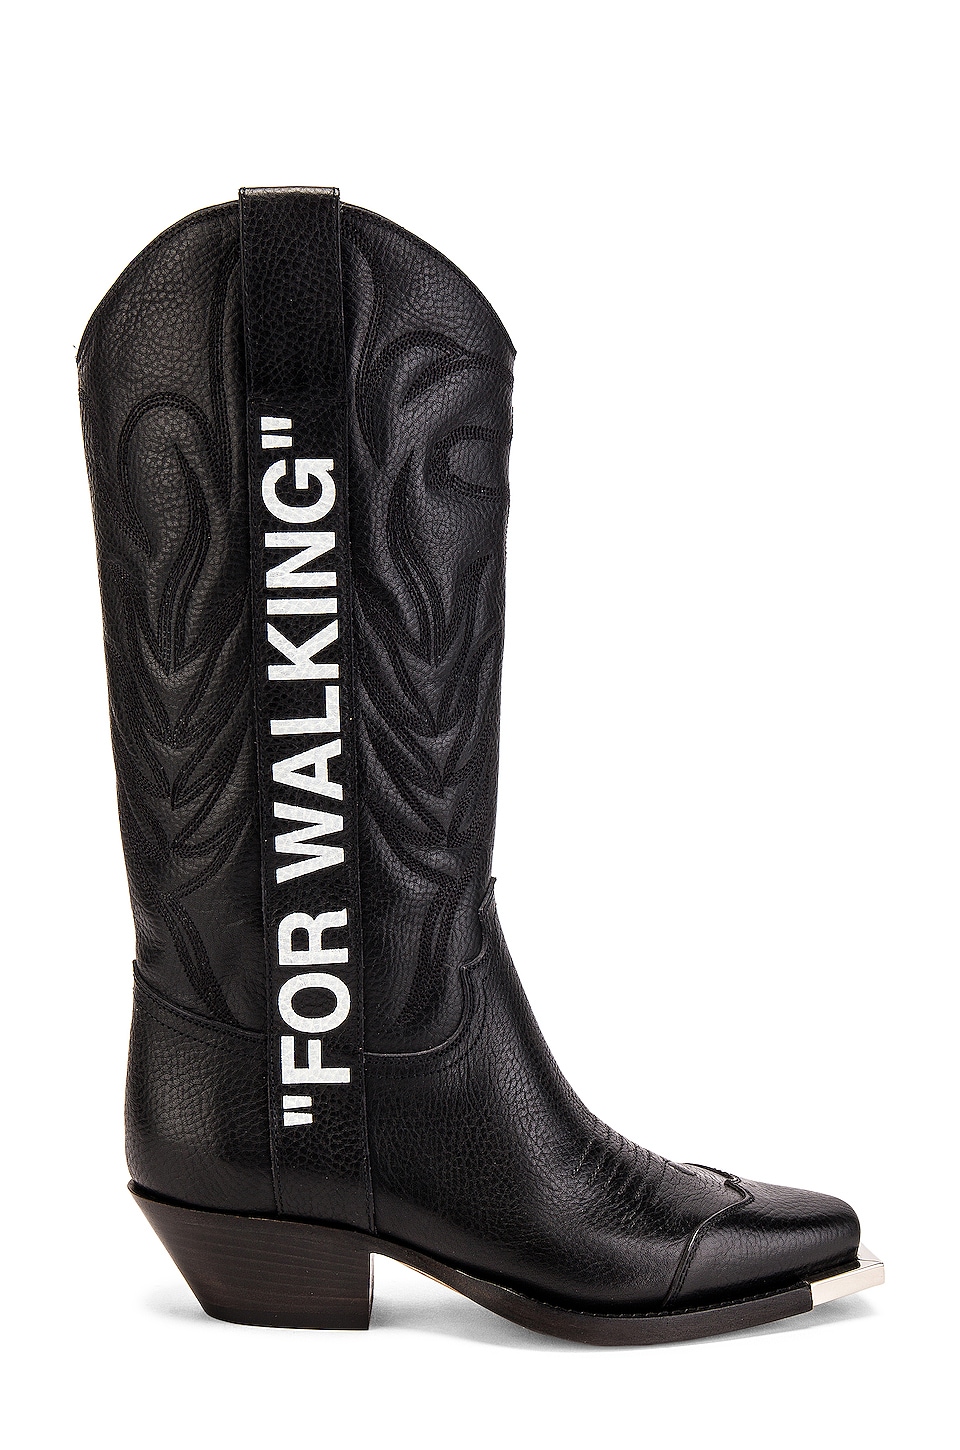 black and gray cowboy boots